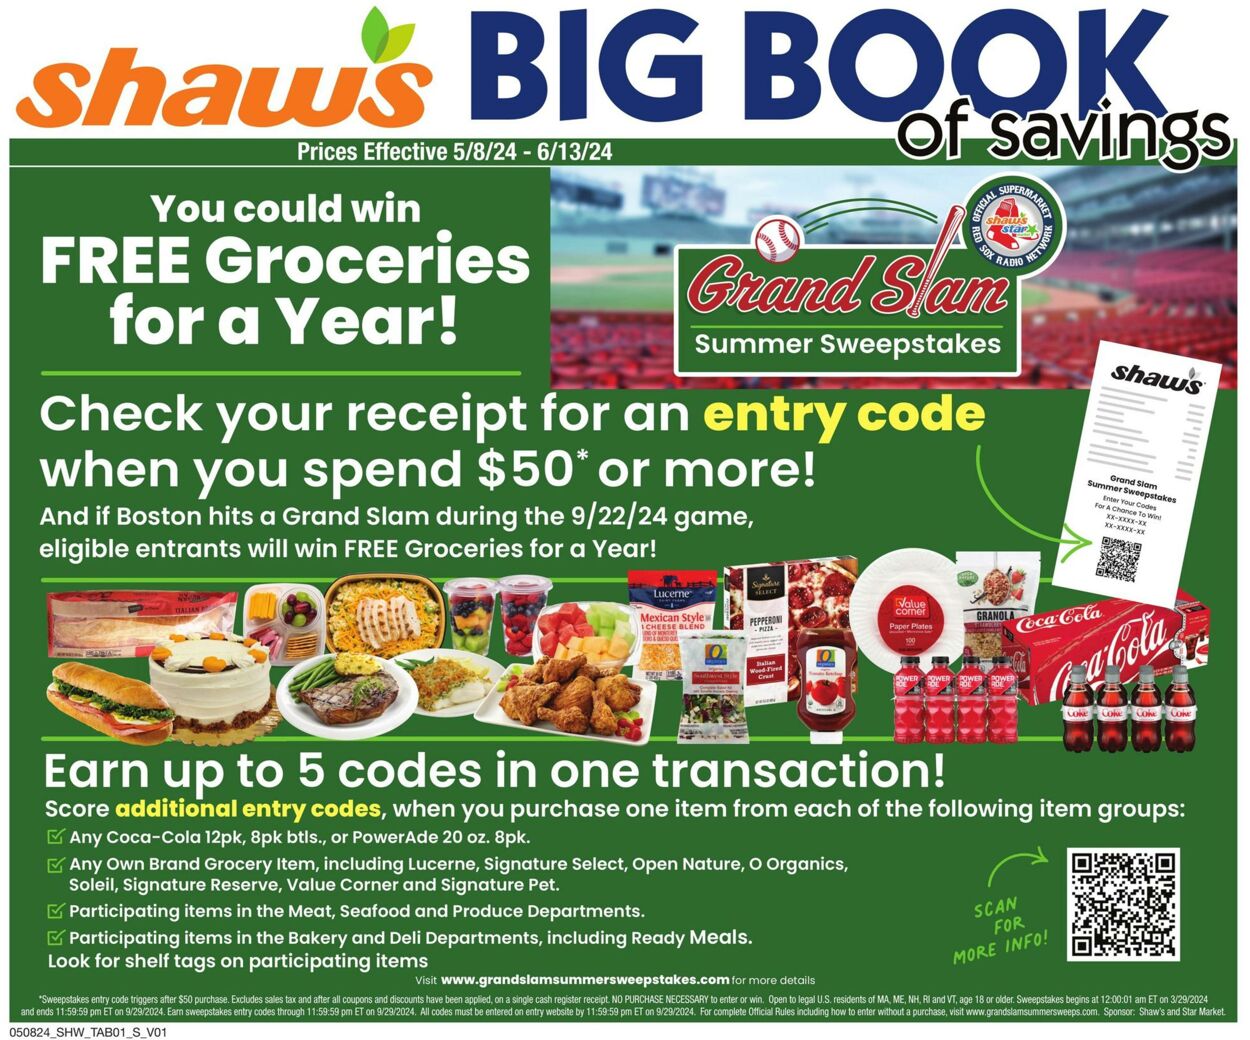 Shaws Promotional weekly ads